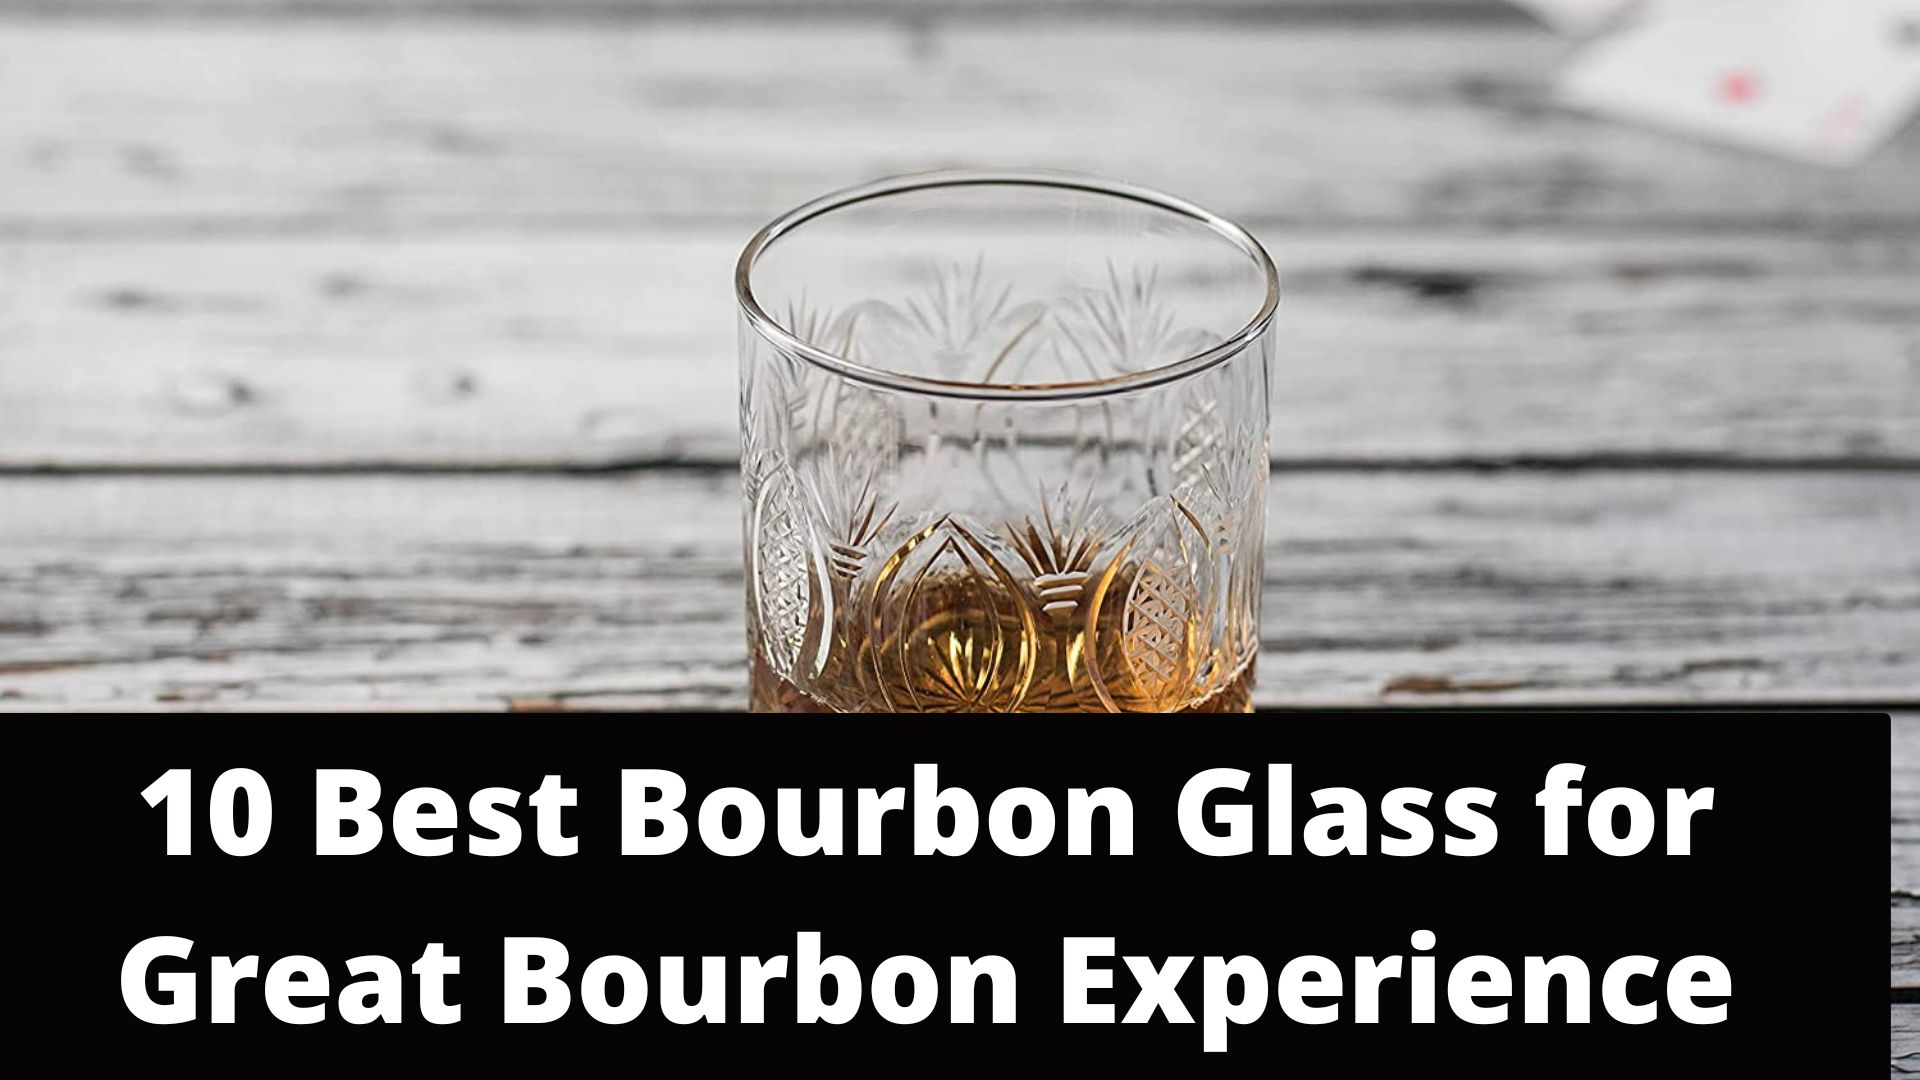 10 Best Bourbon Glass for Great Bourbon Experience